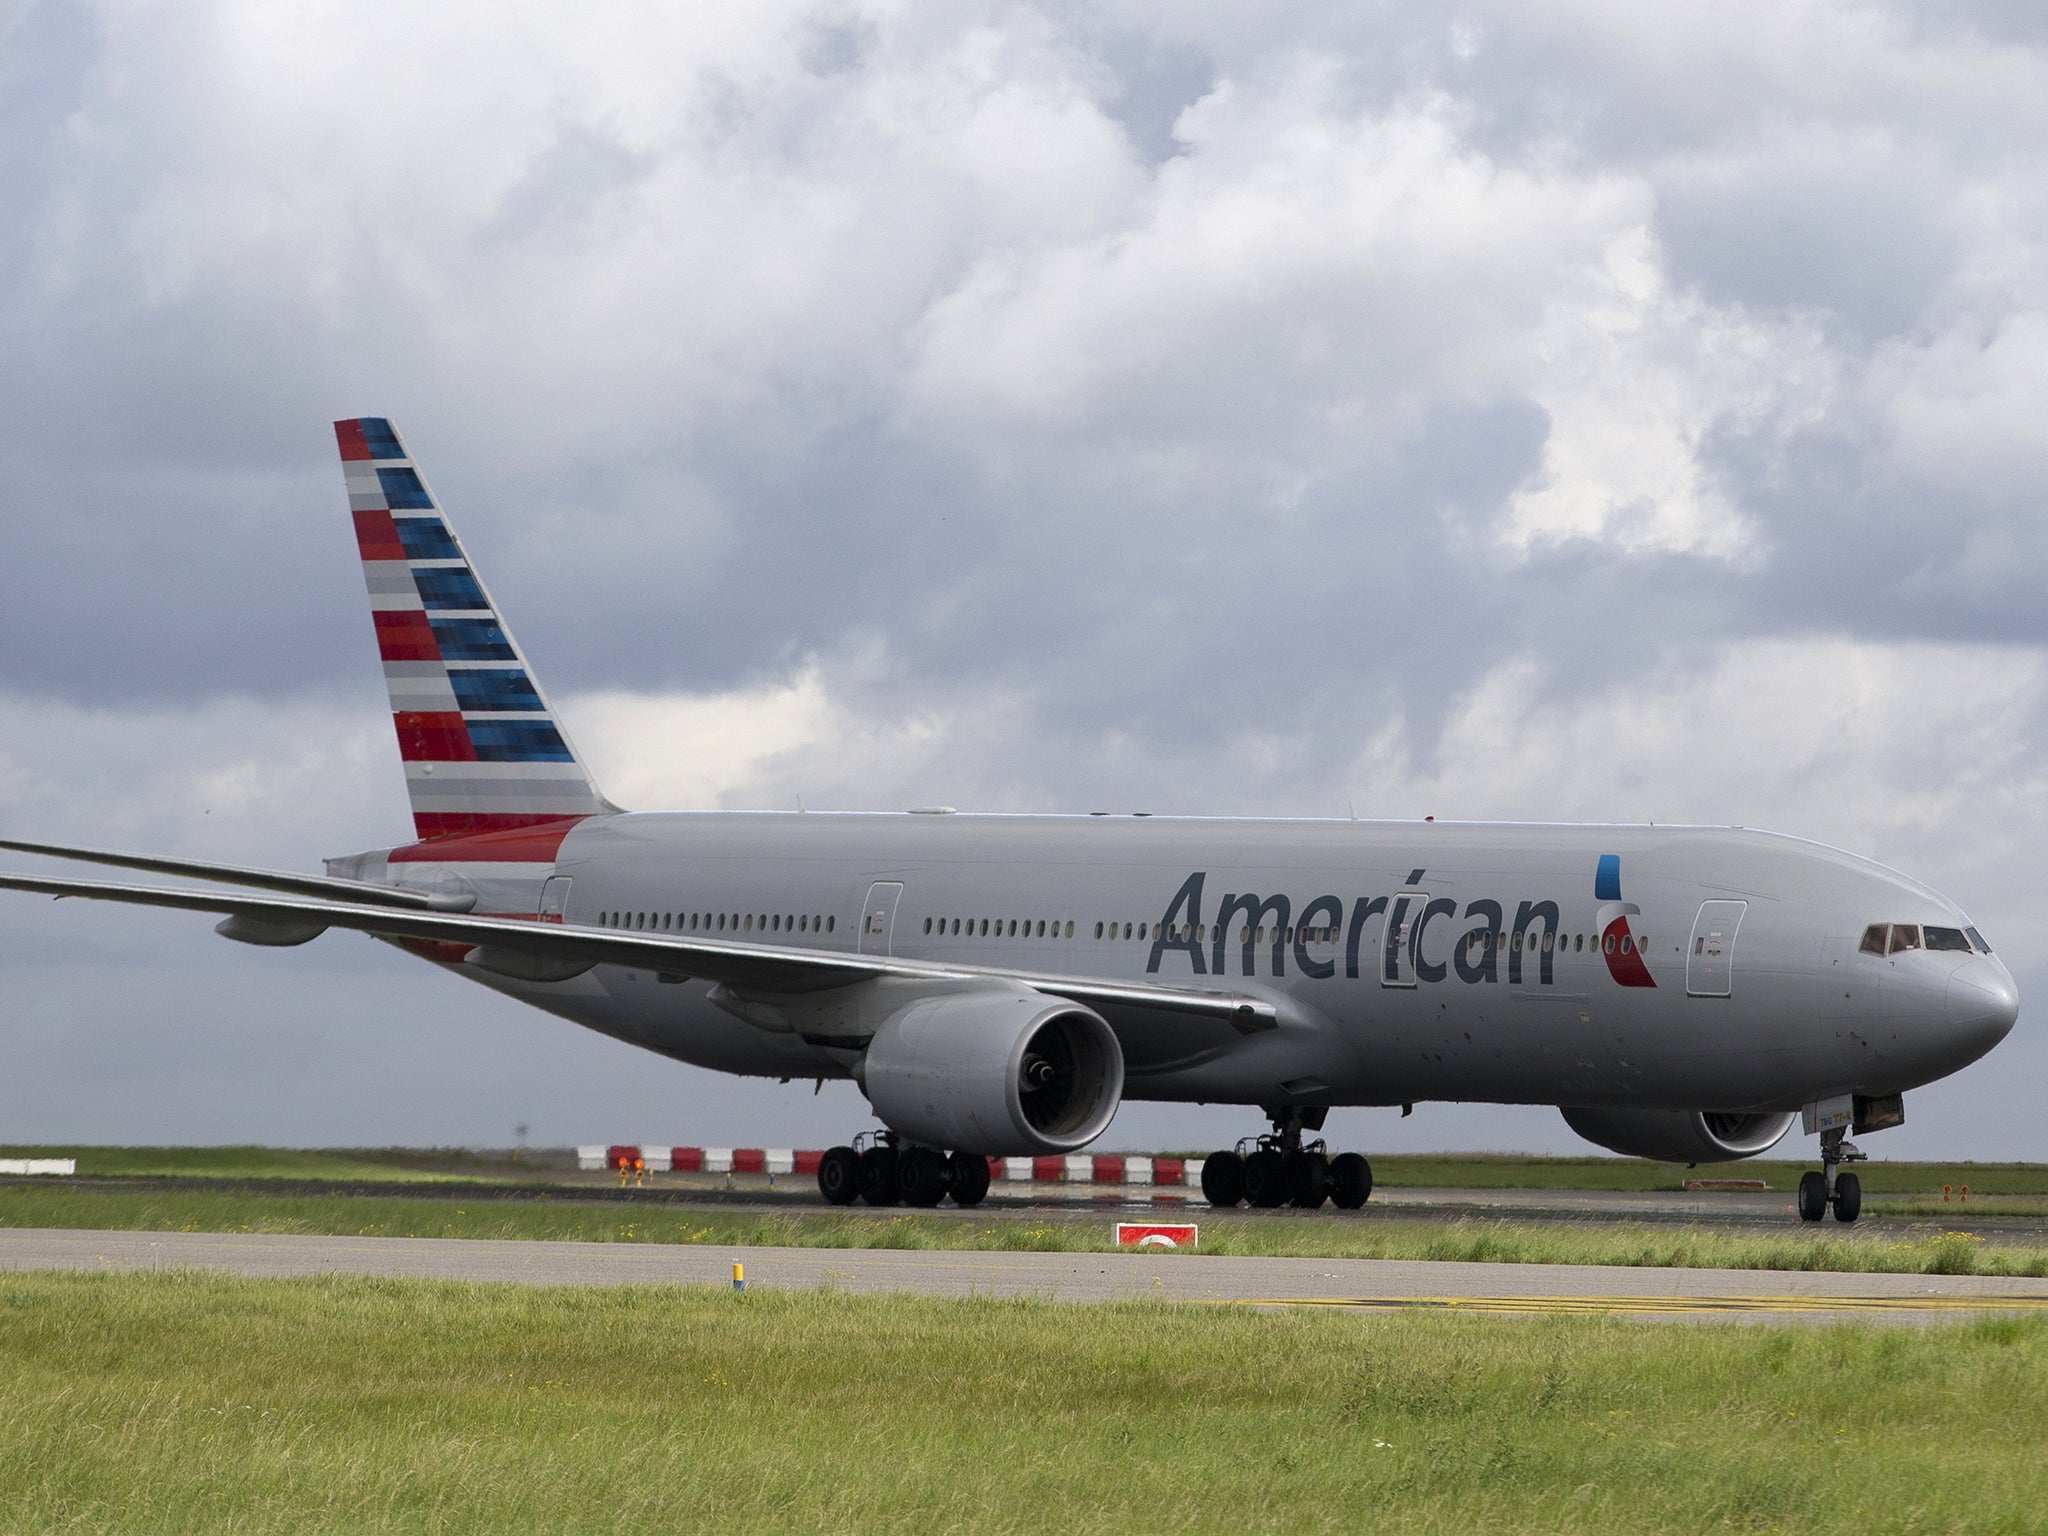 American Airlines flights have been grounded across the US